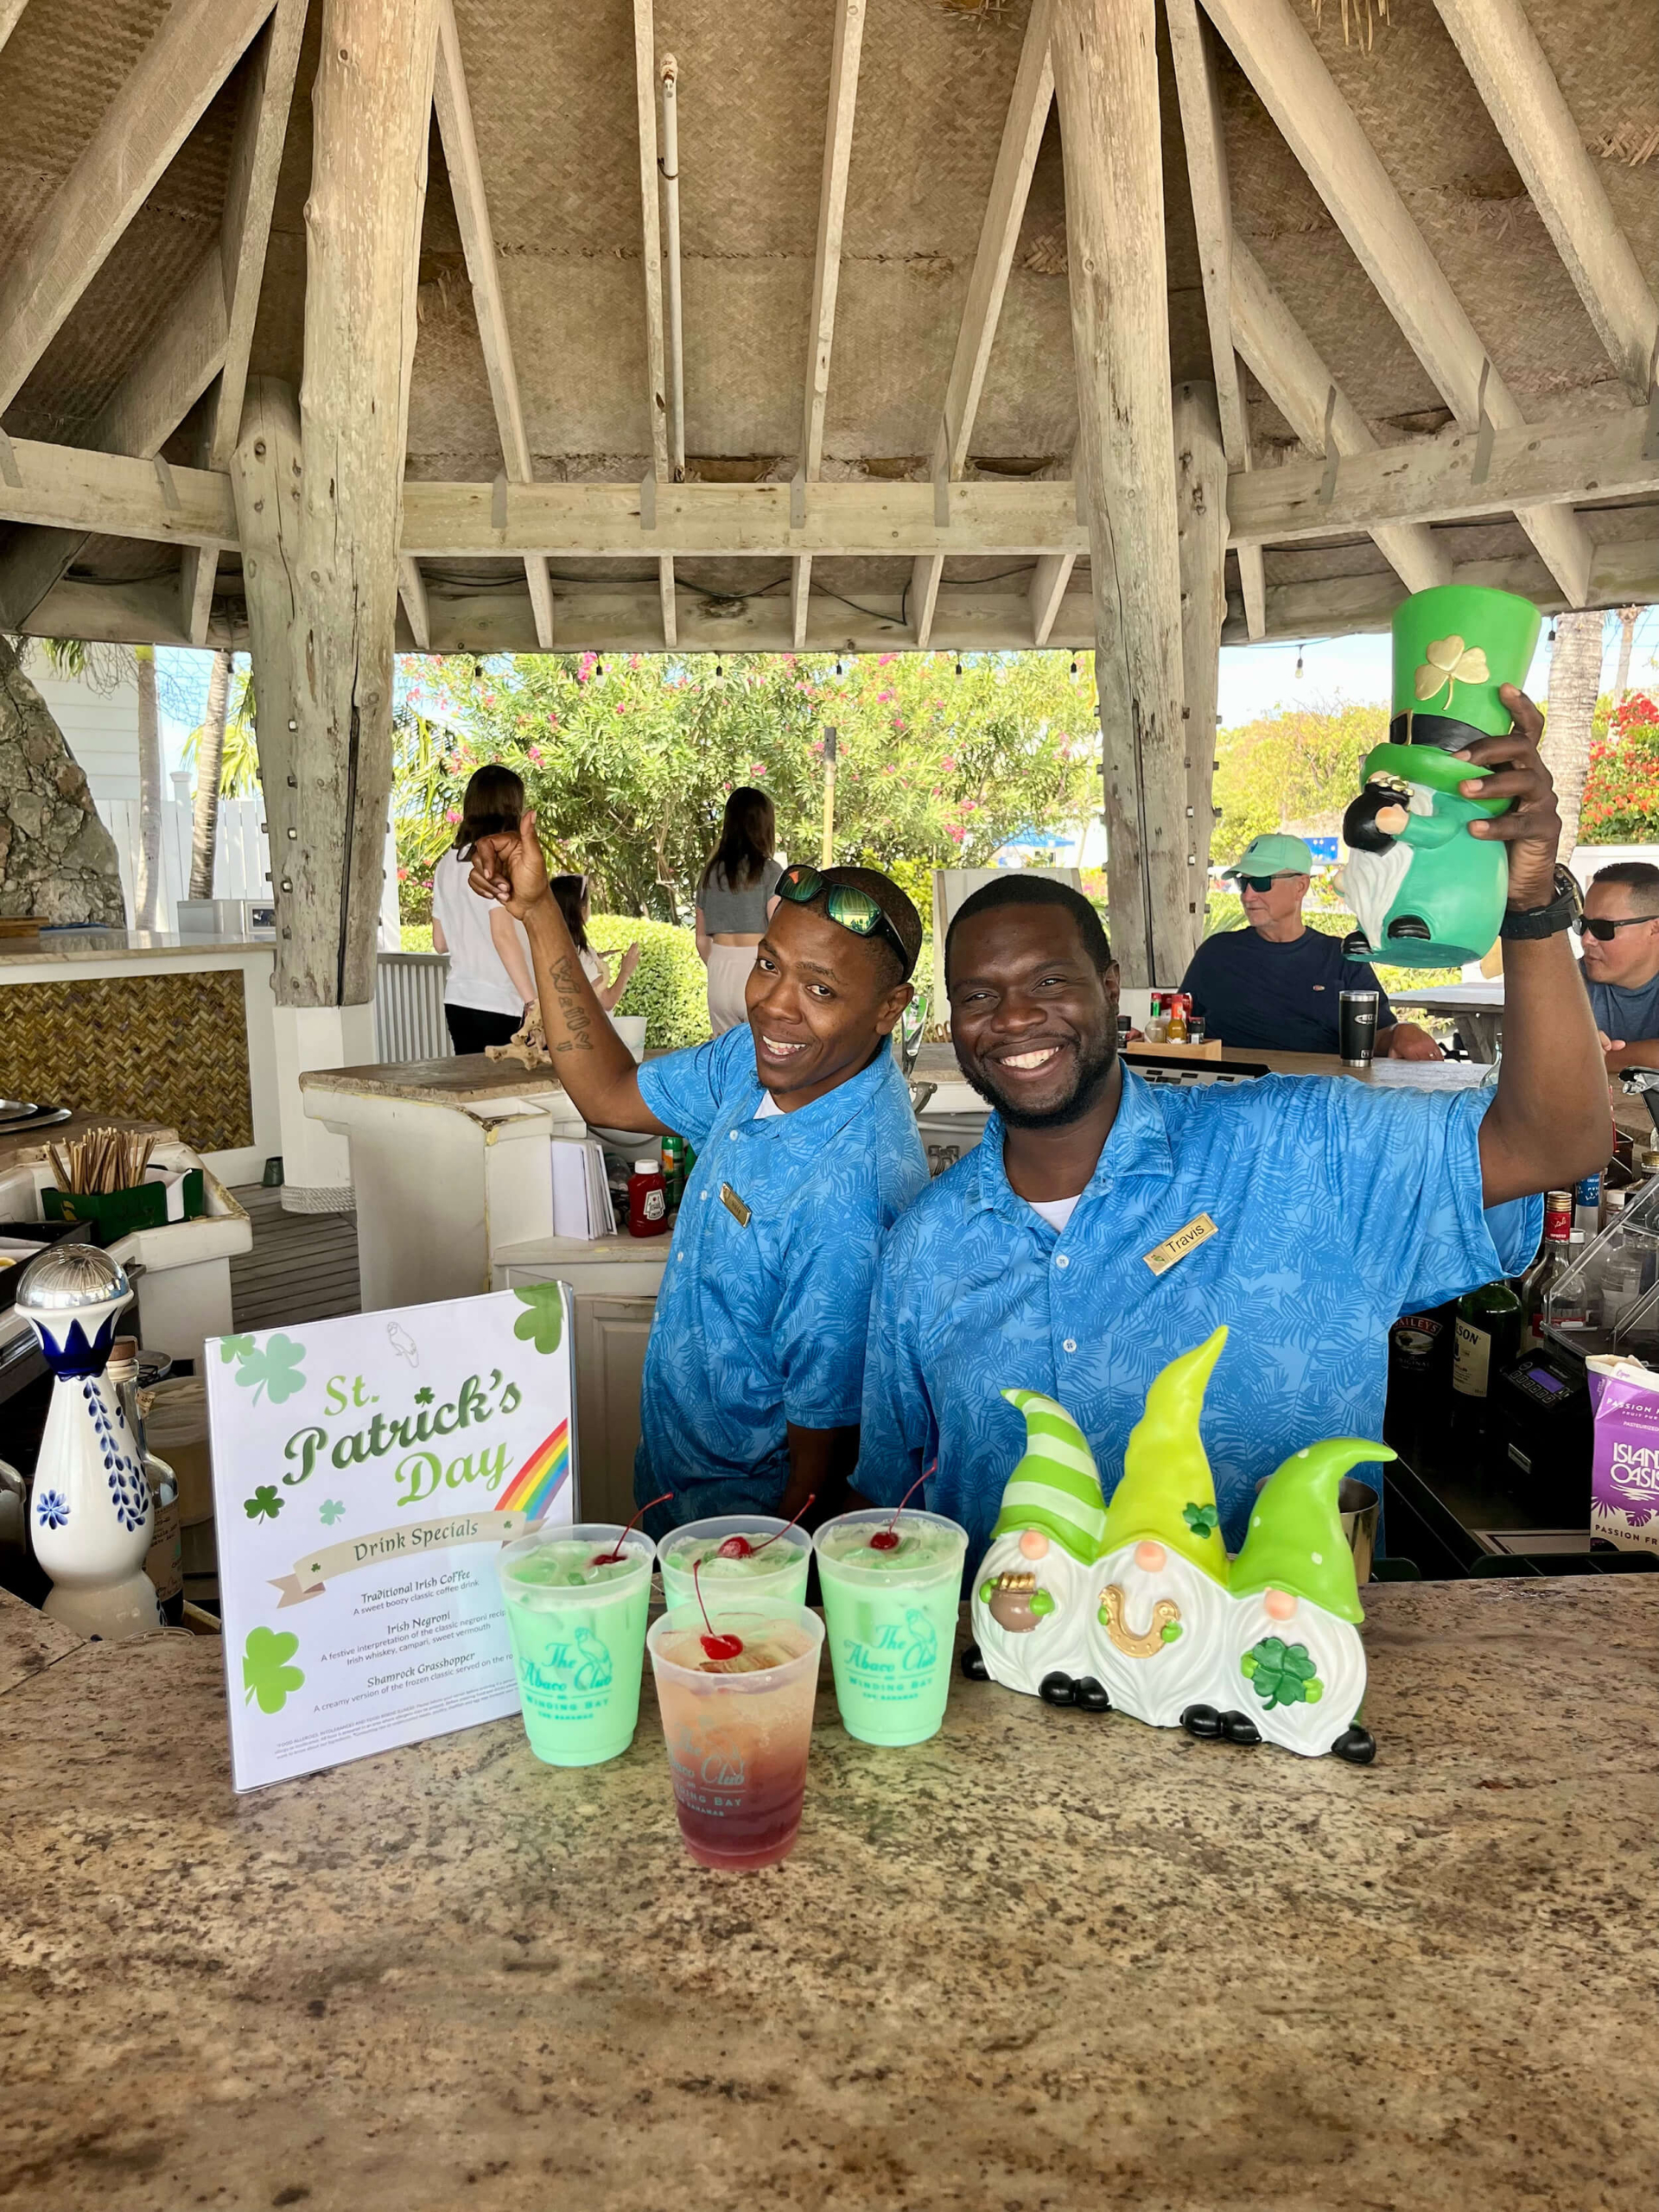 Staff Members from The Abaco Club at a St Patricks Day event